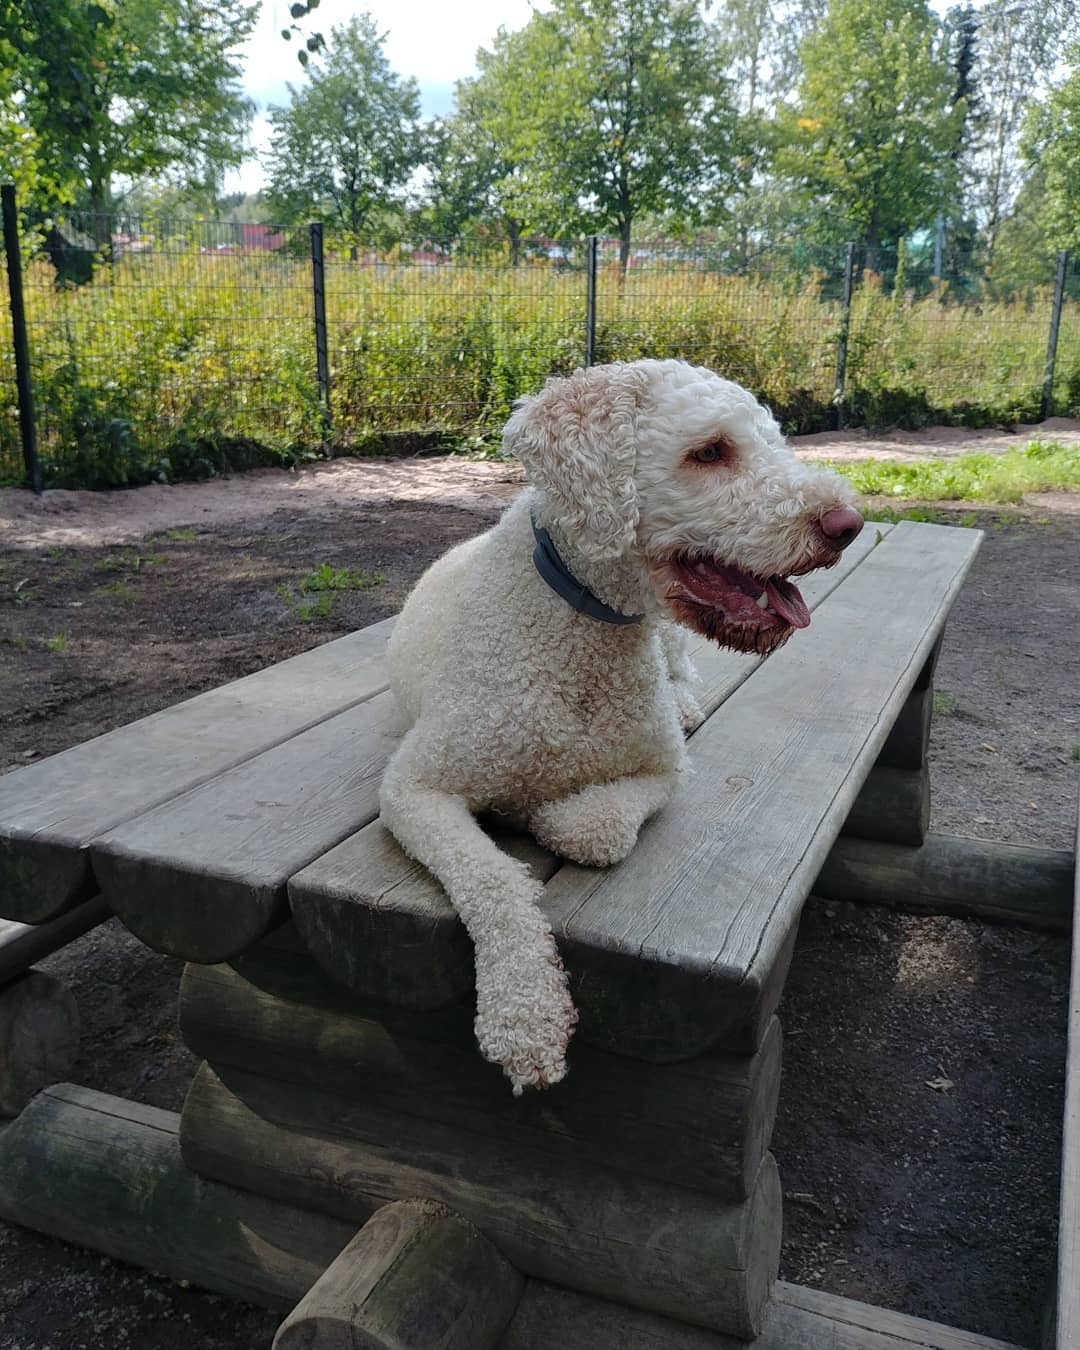 A Lagotto Romagnolo resting on top of the wooden table at the park